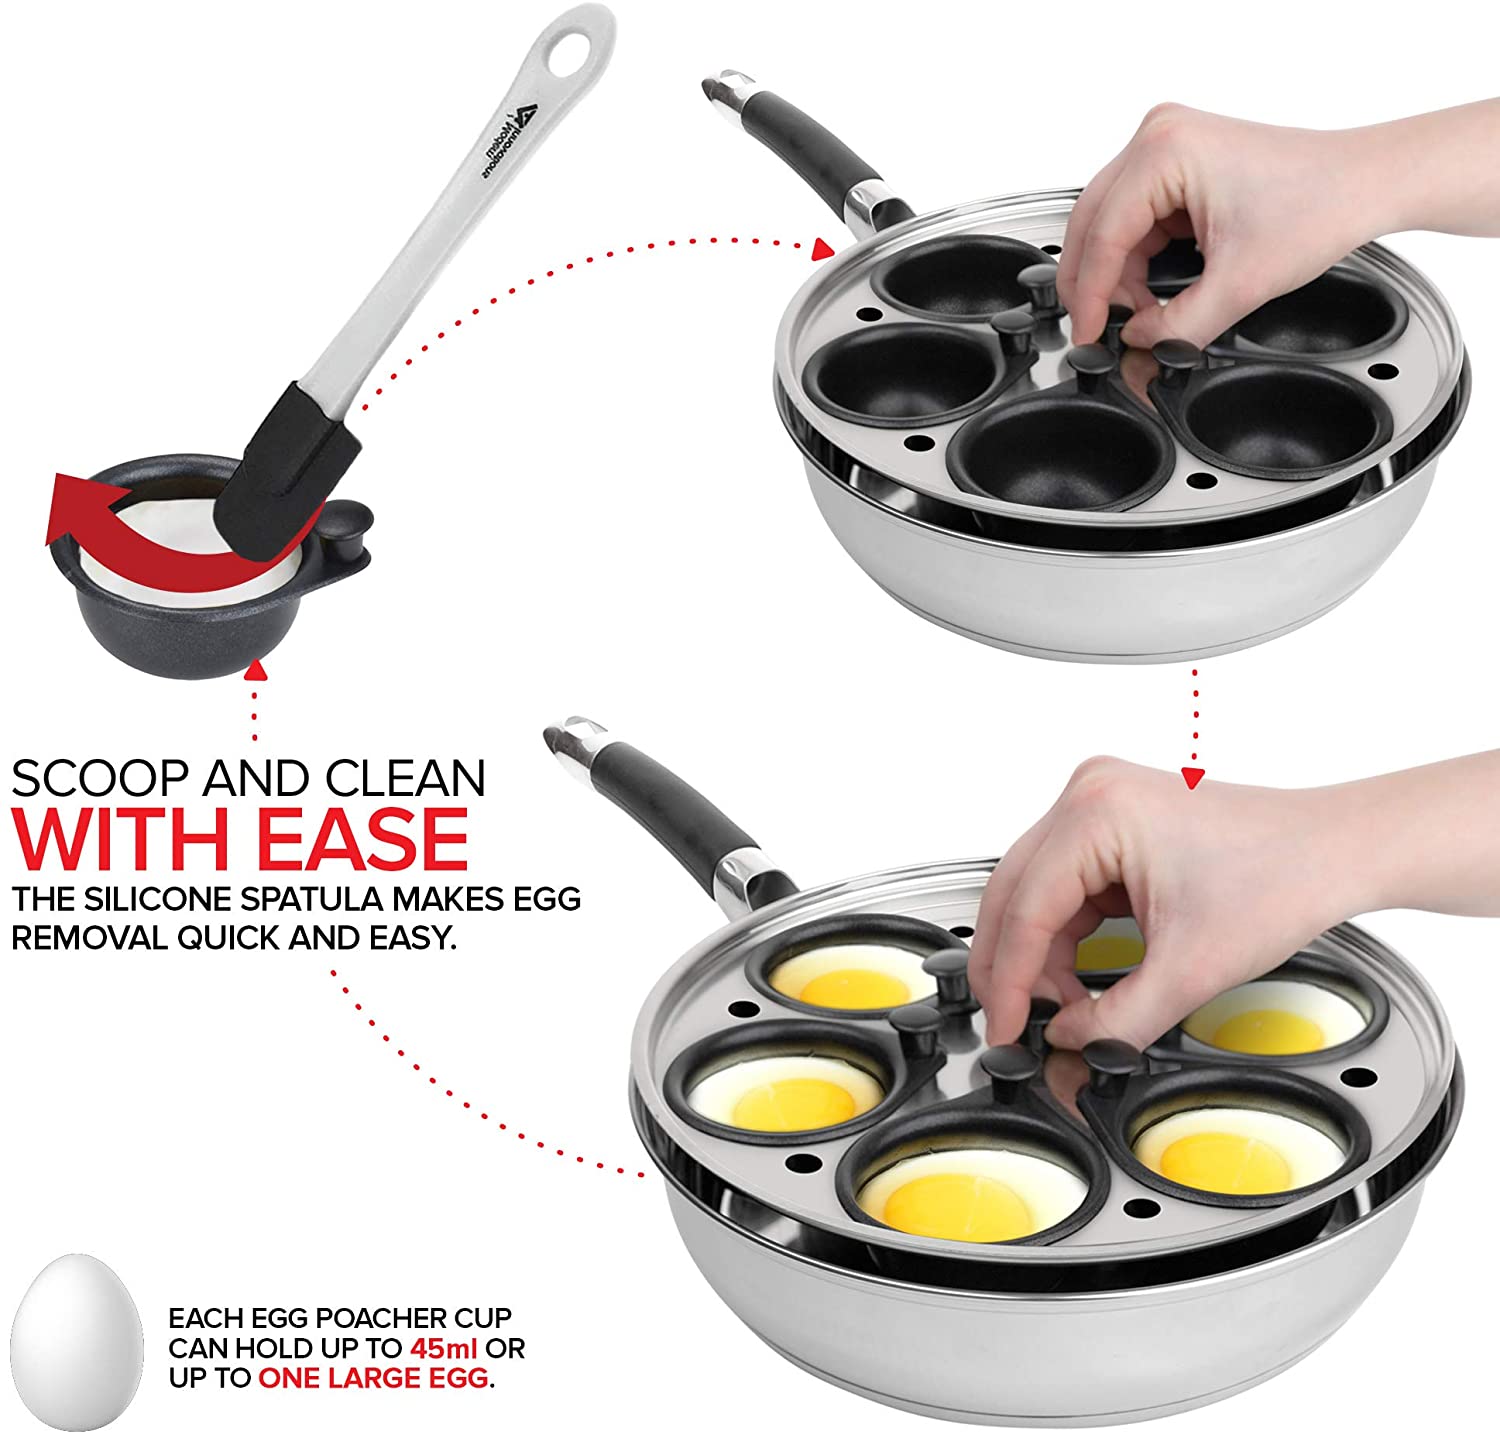 Choice 12-Cup Egg Poacher Set - Includes 12 Cups, Inset, Cover, and Saute  Pan